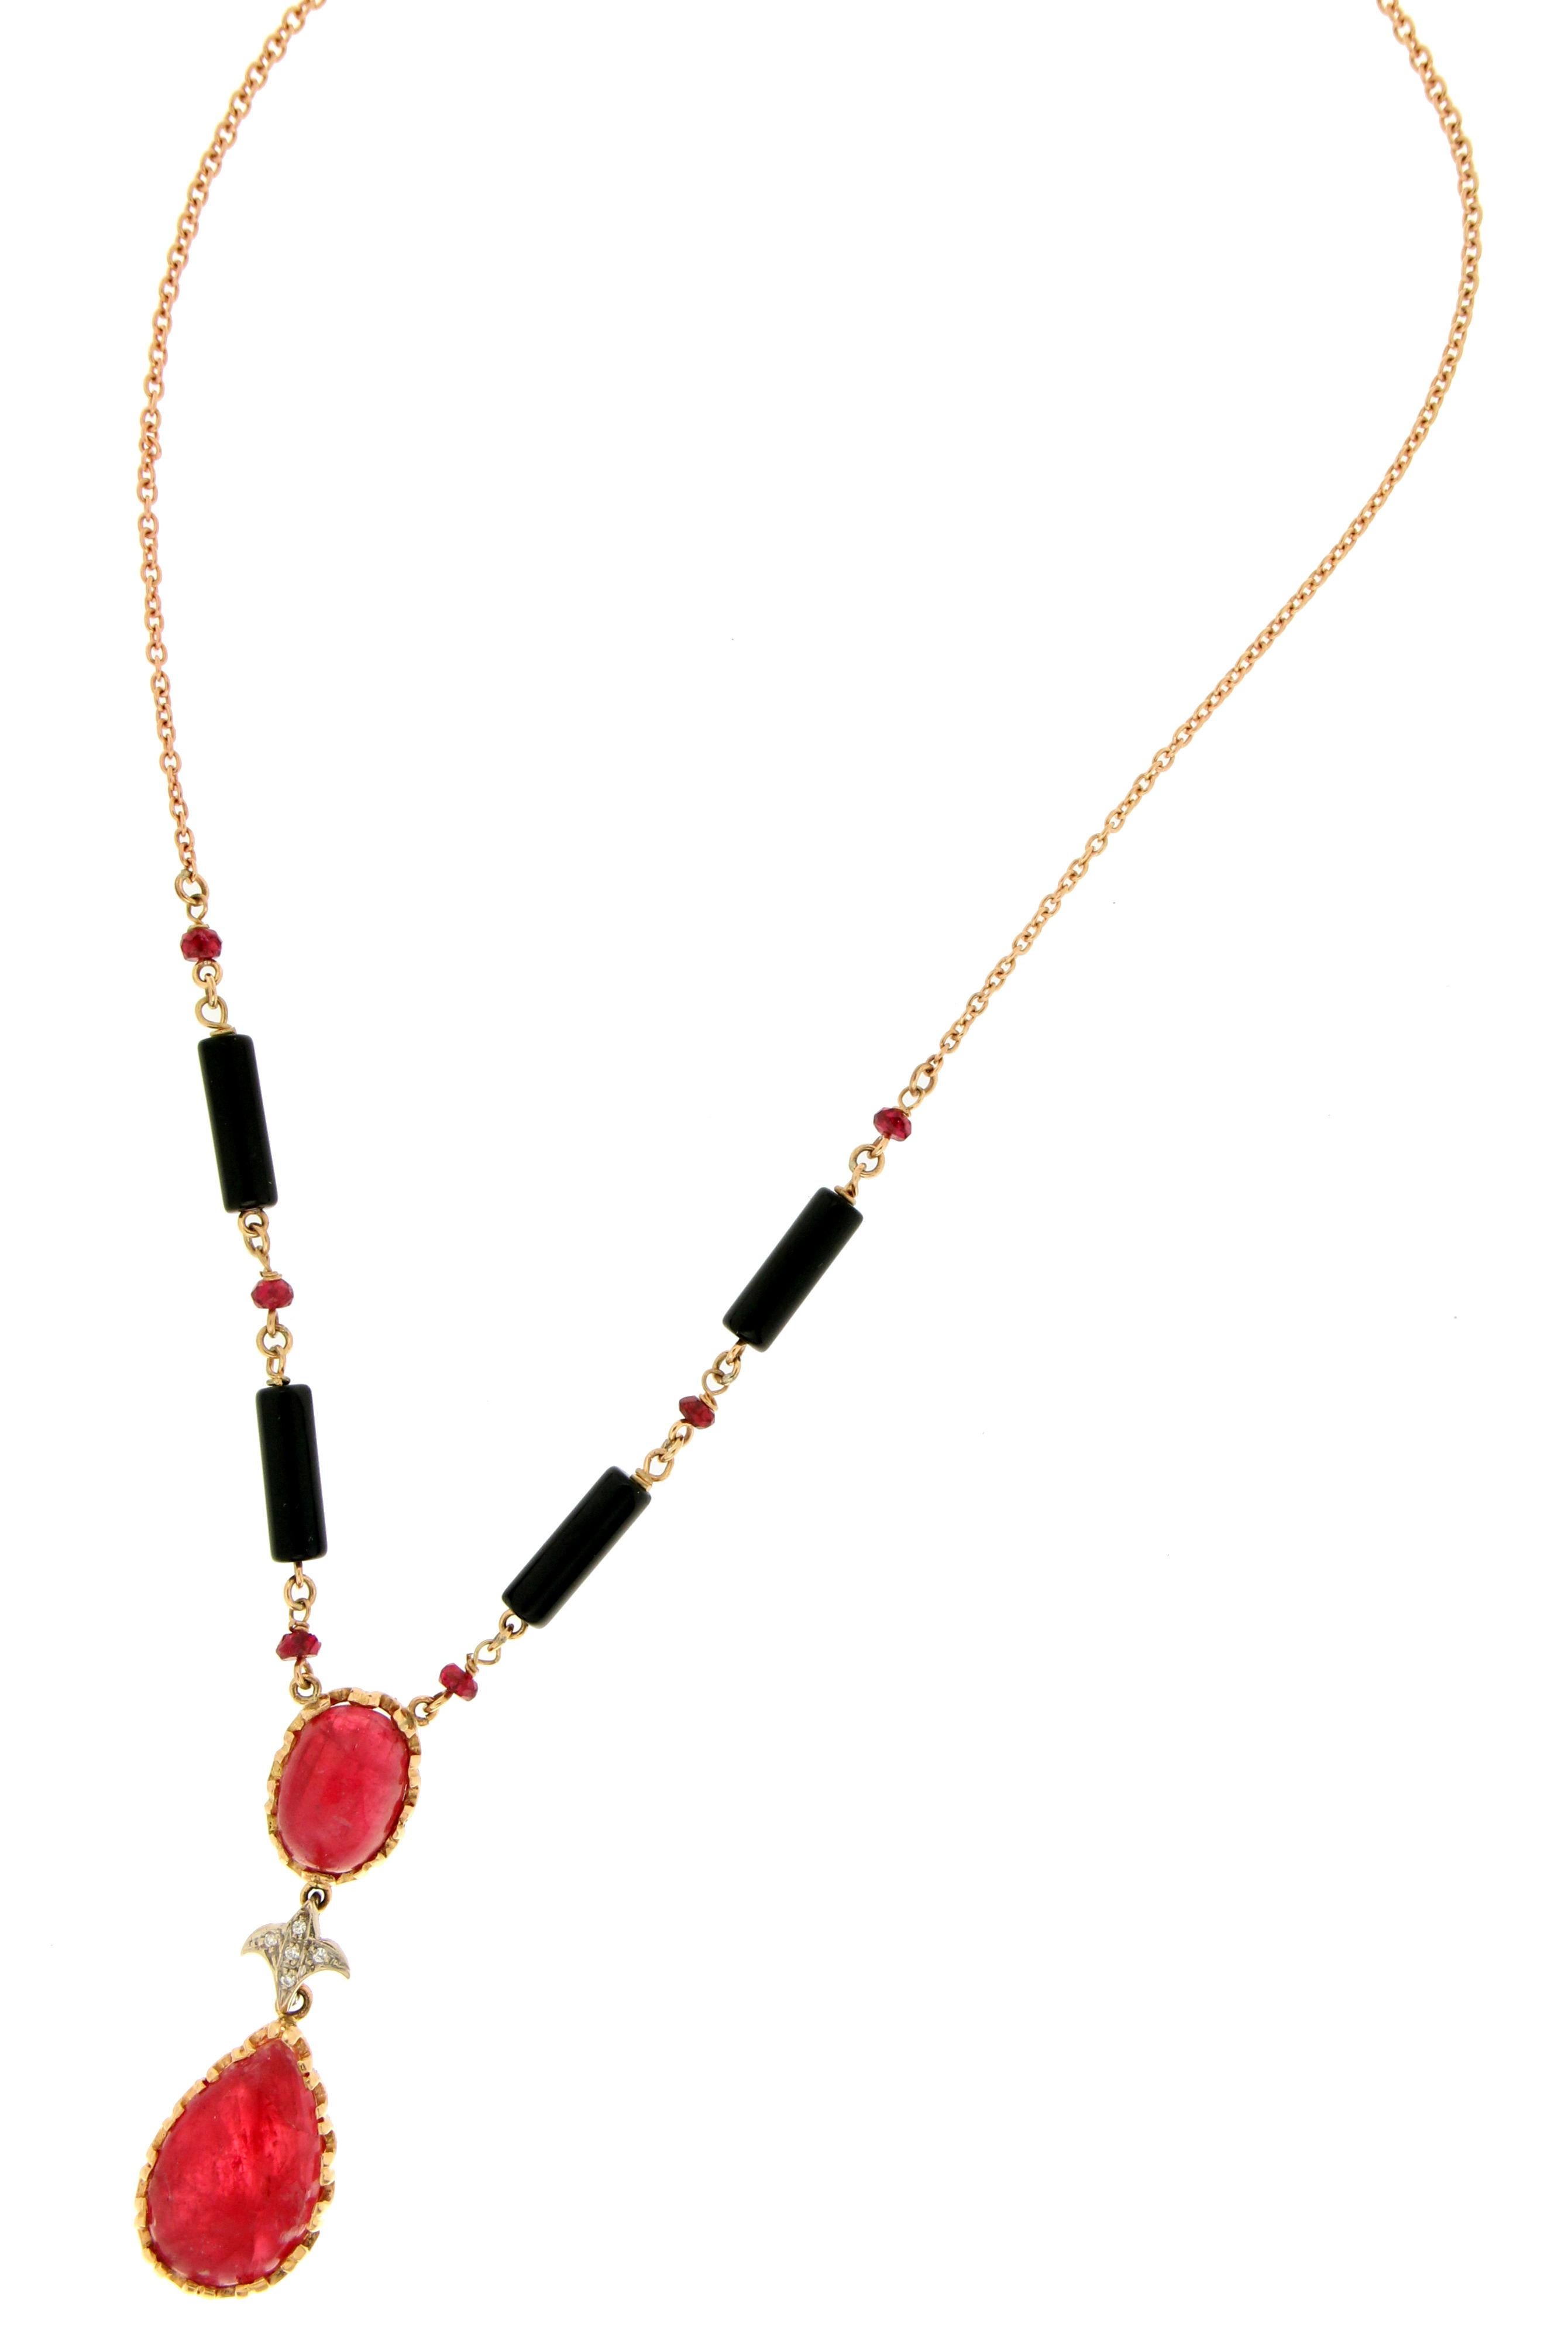 14 karat yellow gold pendant necklace. Handmade by our craftsmen and assembled with barrels onyx,diamonds,round ruby and drop ruby

Chain size 41 cm 
Barrels onyx size 13 mm (length)
Drop Ruby size 19 mm (length) 14 mm (width)
Diamonds weight 0.05